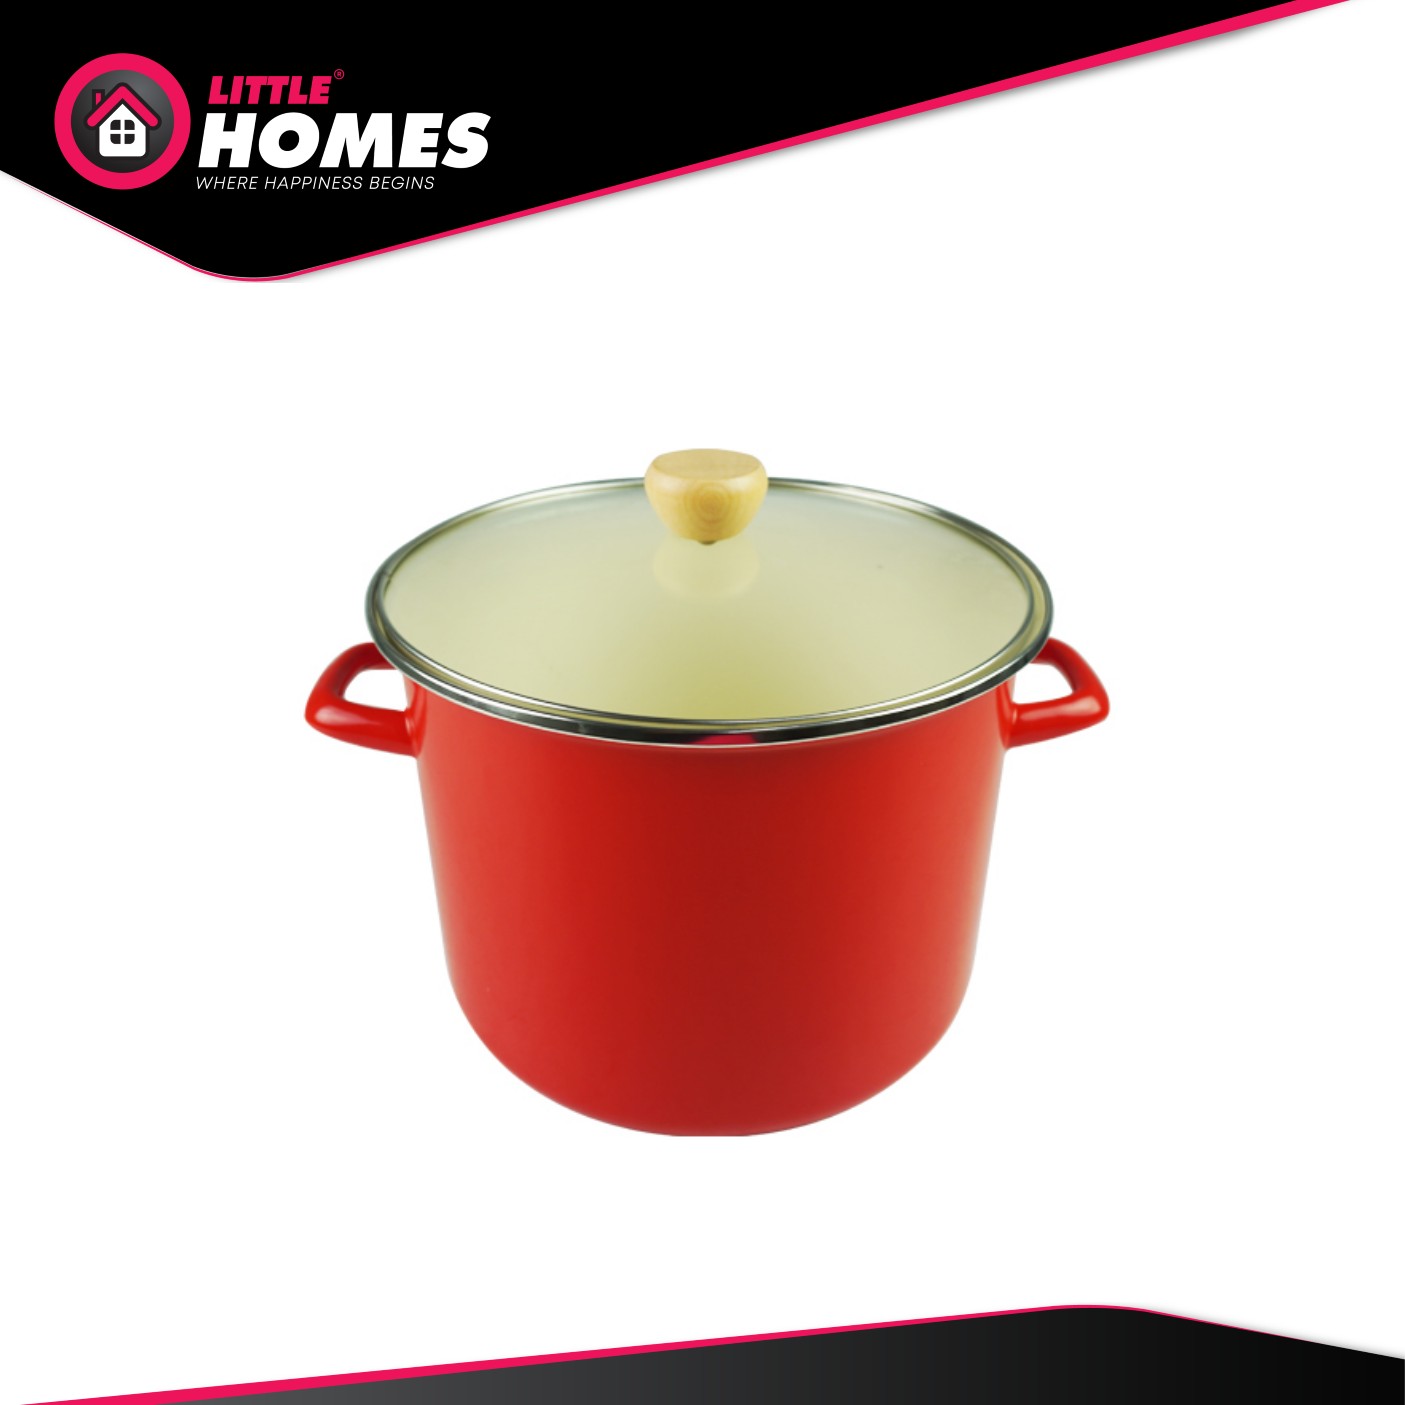 Little Homes Cherry Enamel Coated Stock Pot (26cm) with Tempered Glass Lid